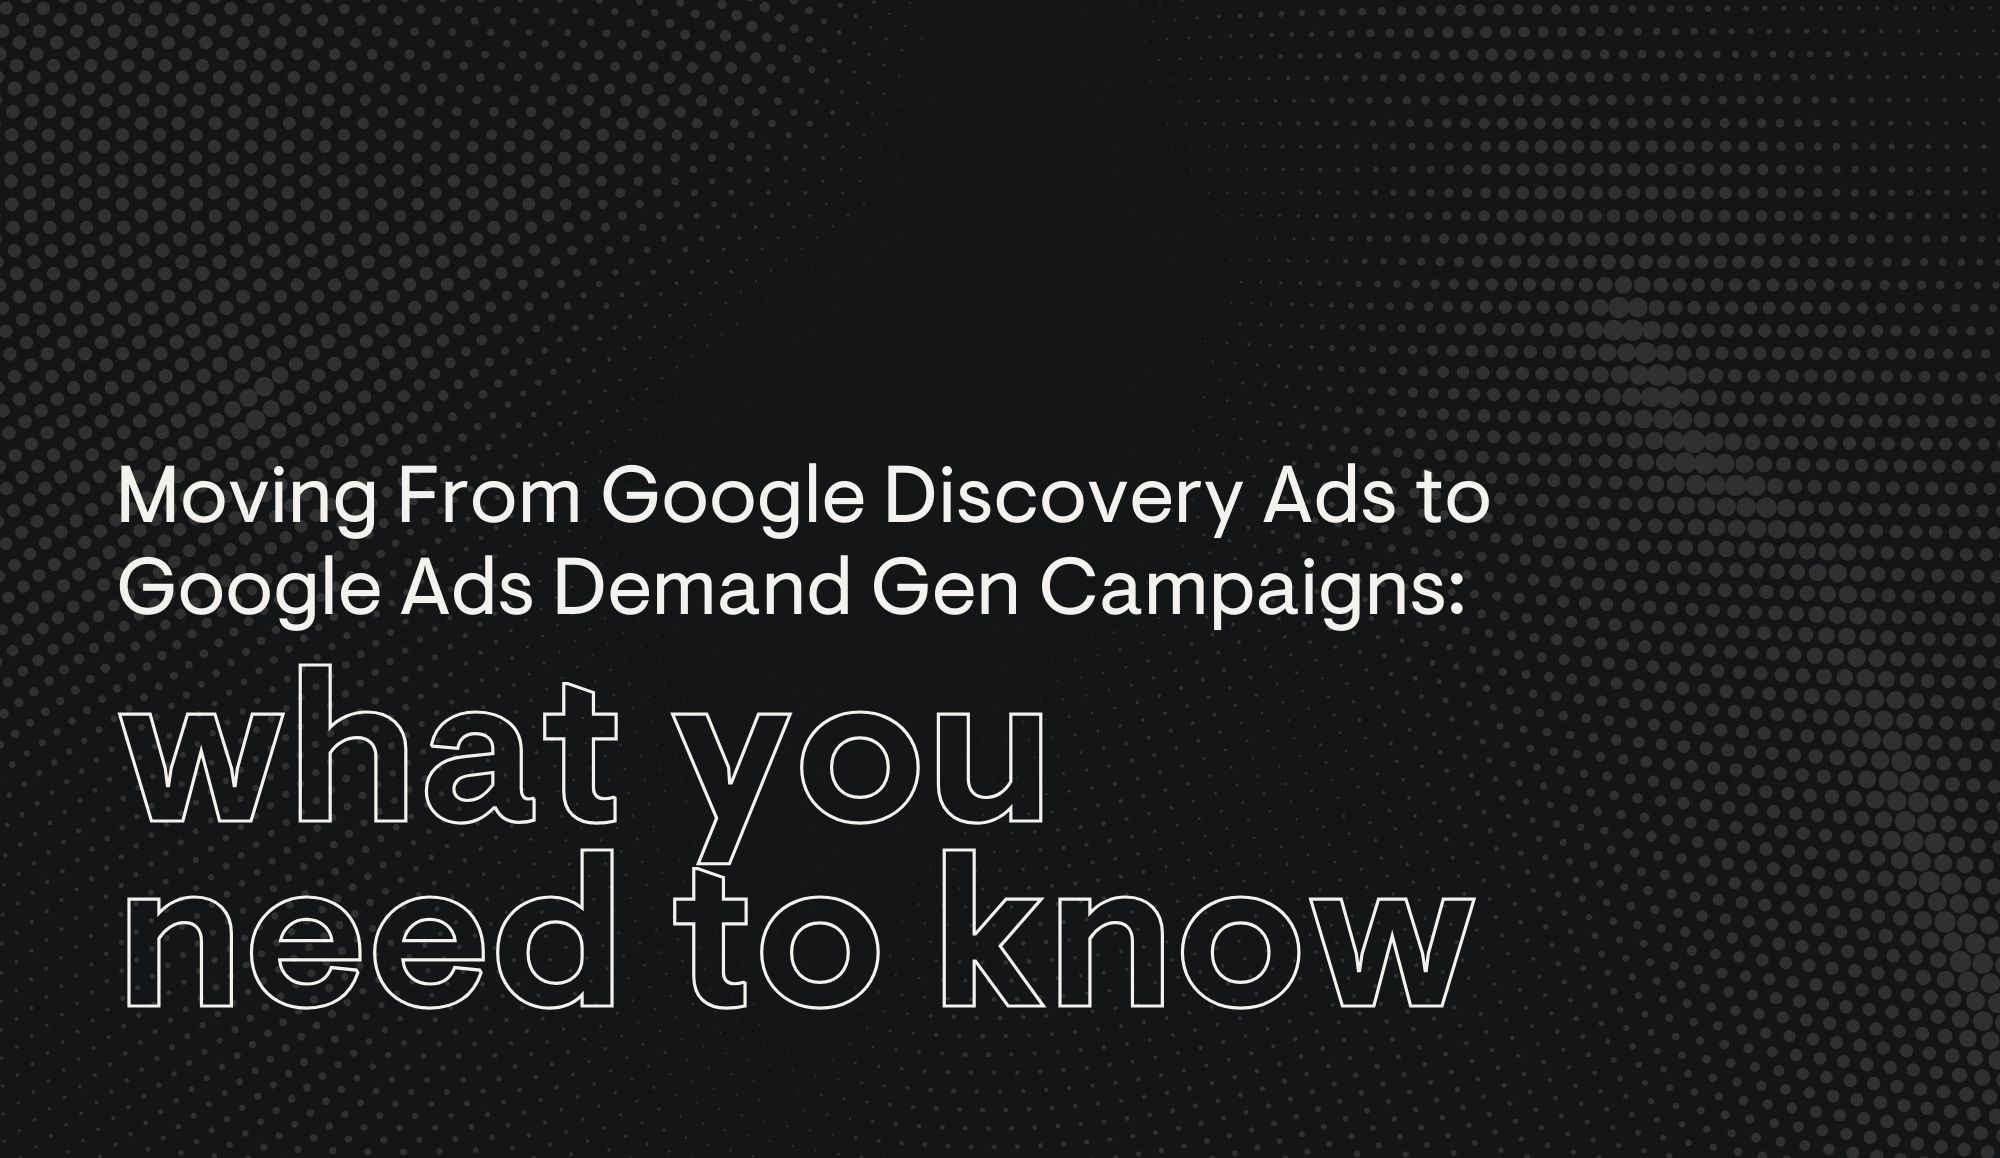 Moving From Google Discovery Ads to Google Ads Demand Gen Campaigns.